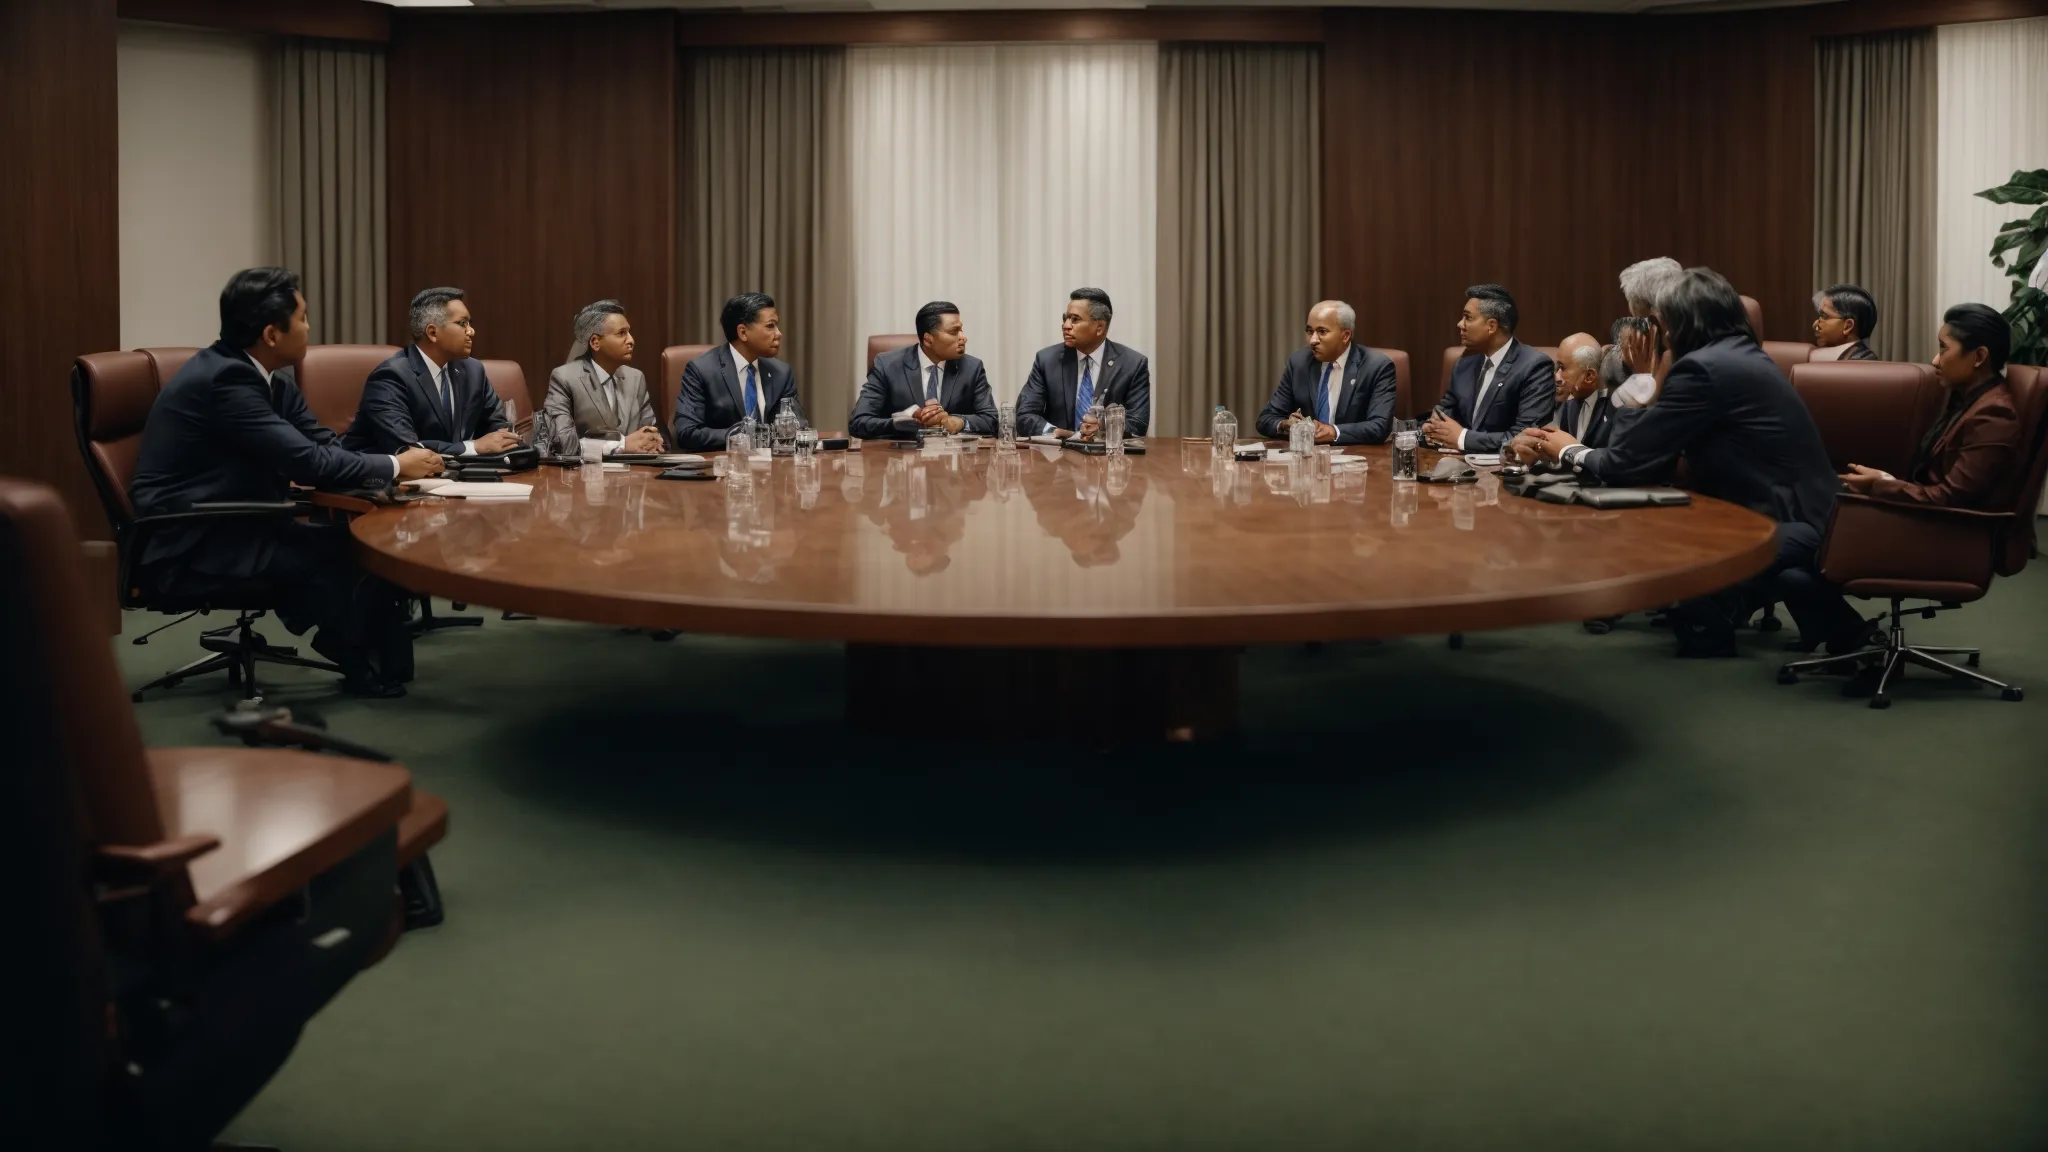 a roundtable of dignitaries engaged in earnest discussion within a conference room.